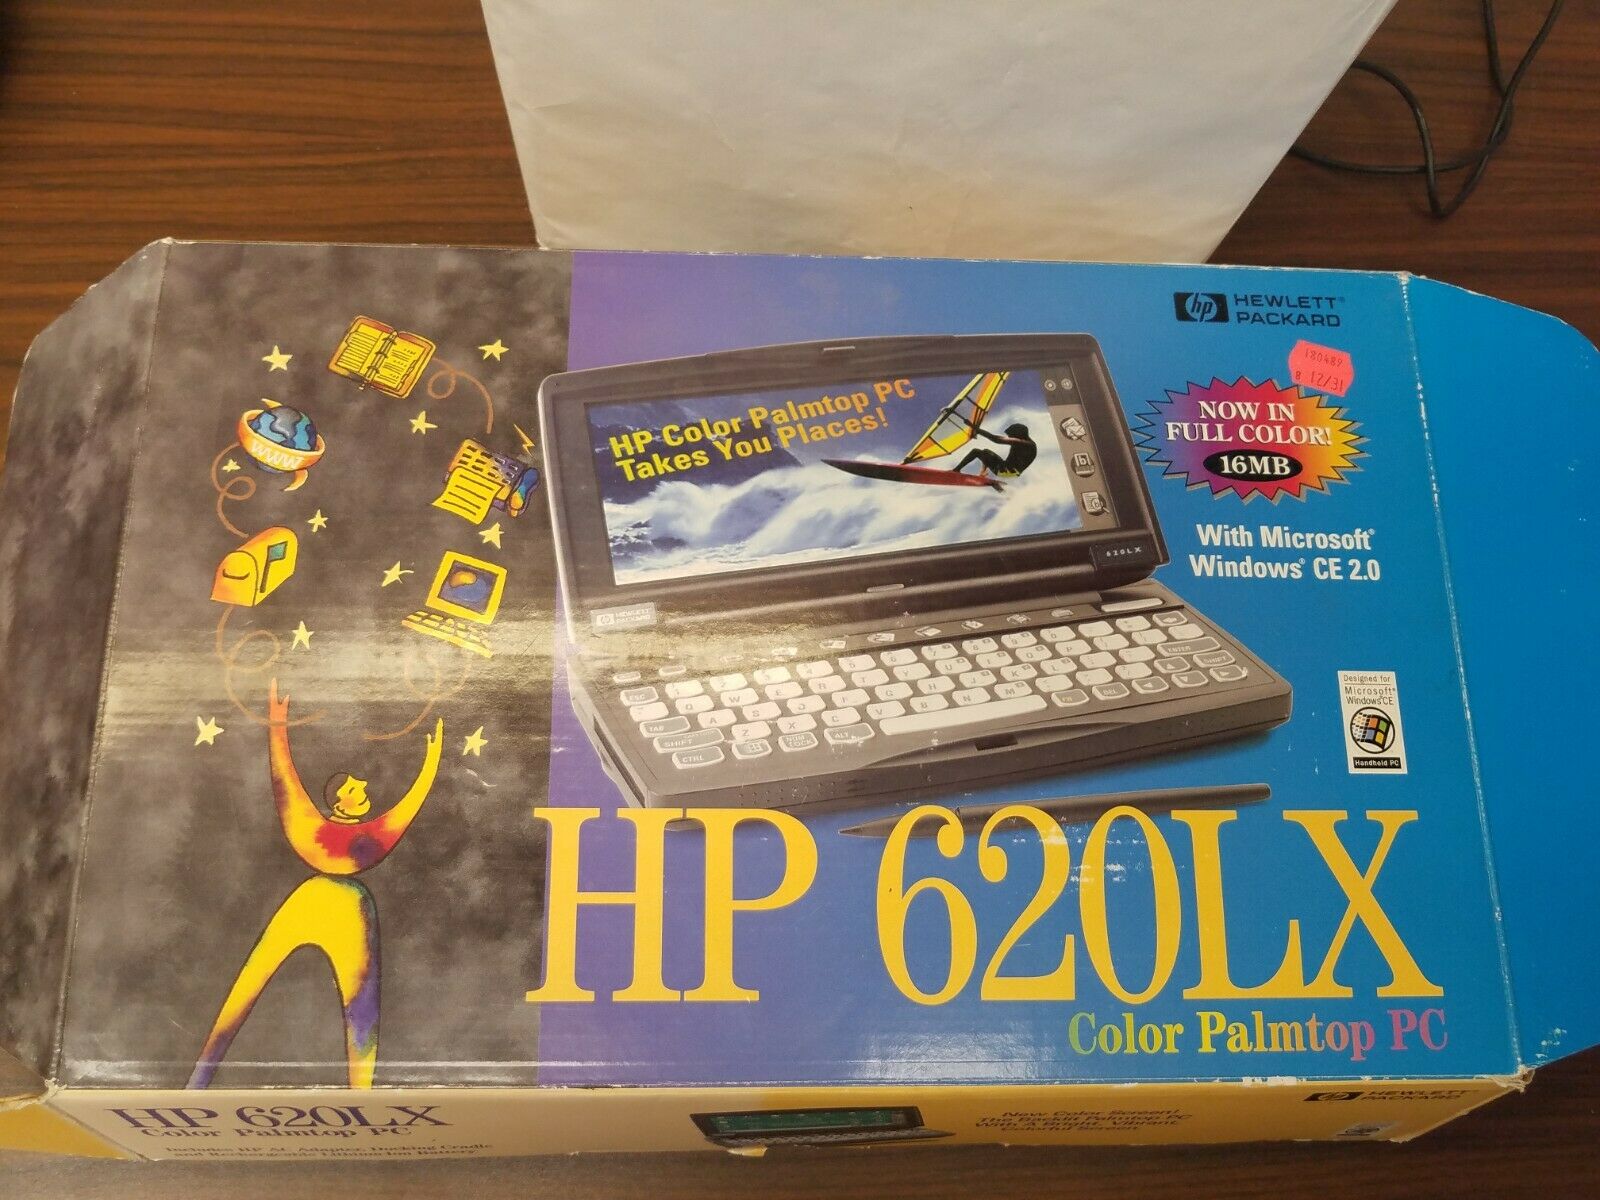 Hp 620lx Color Palmtop Pc In Box Used